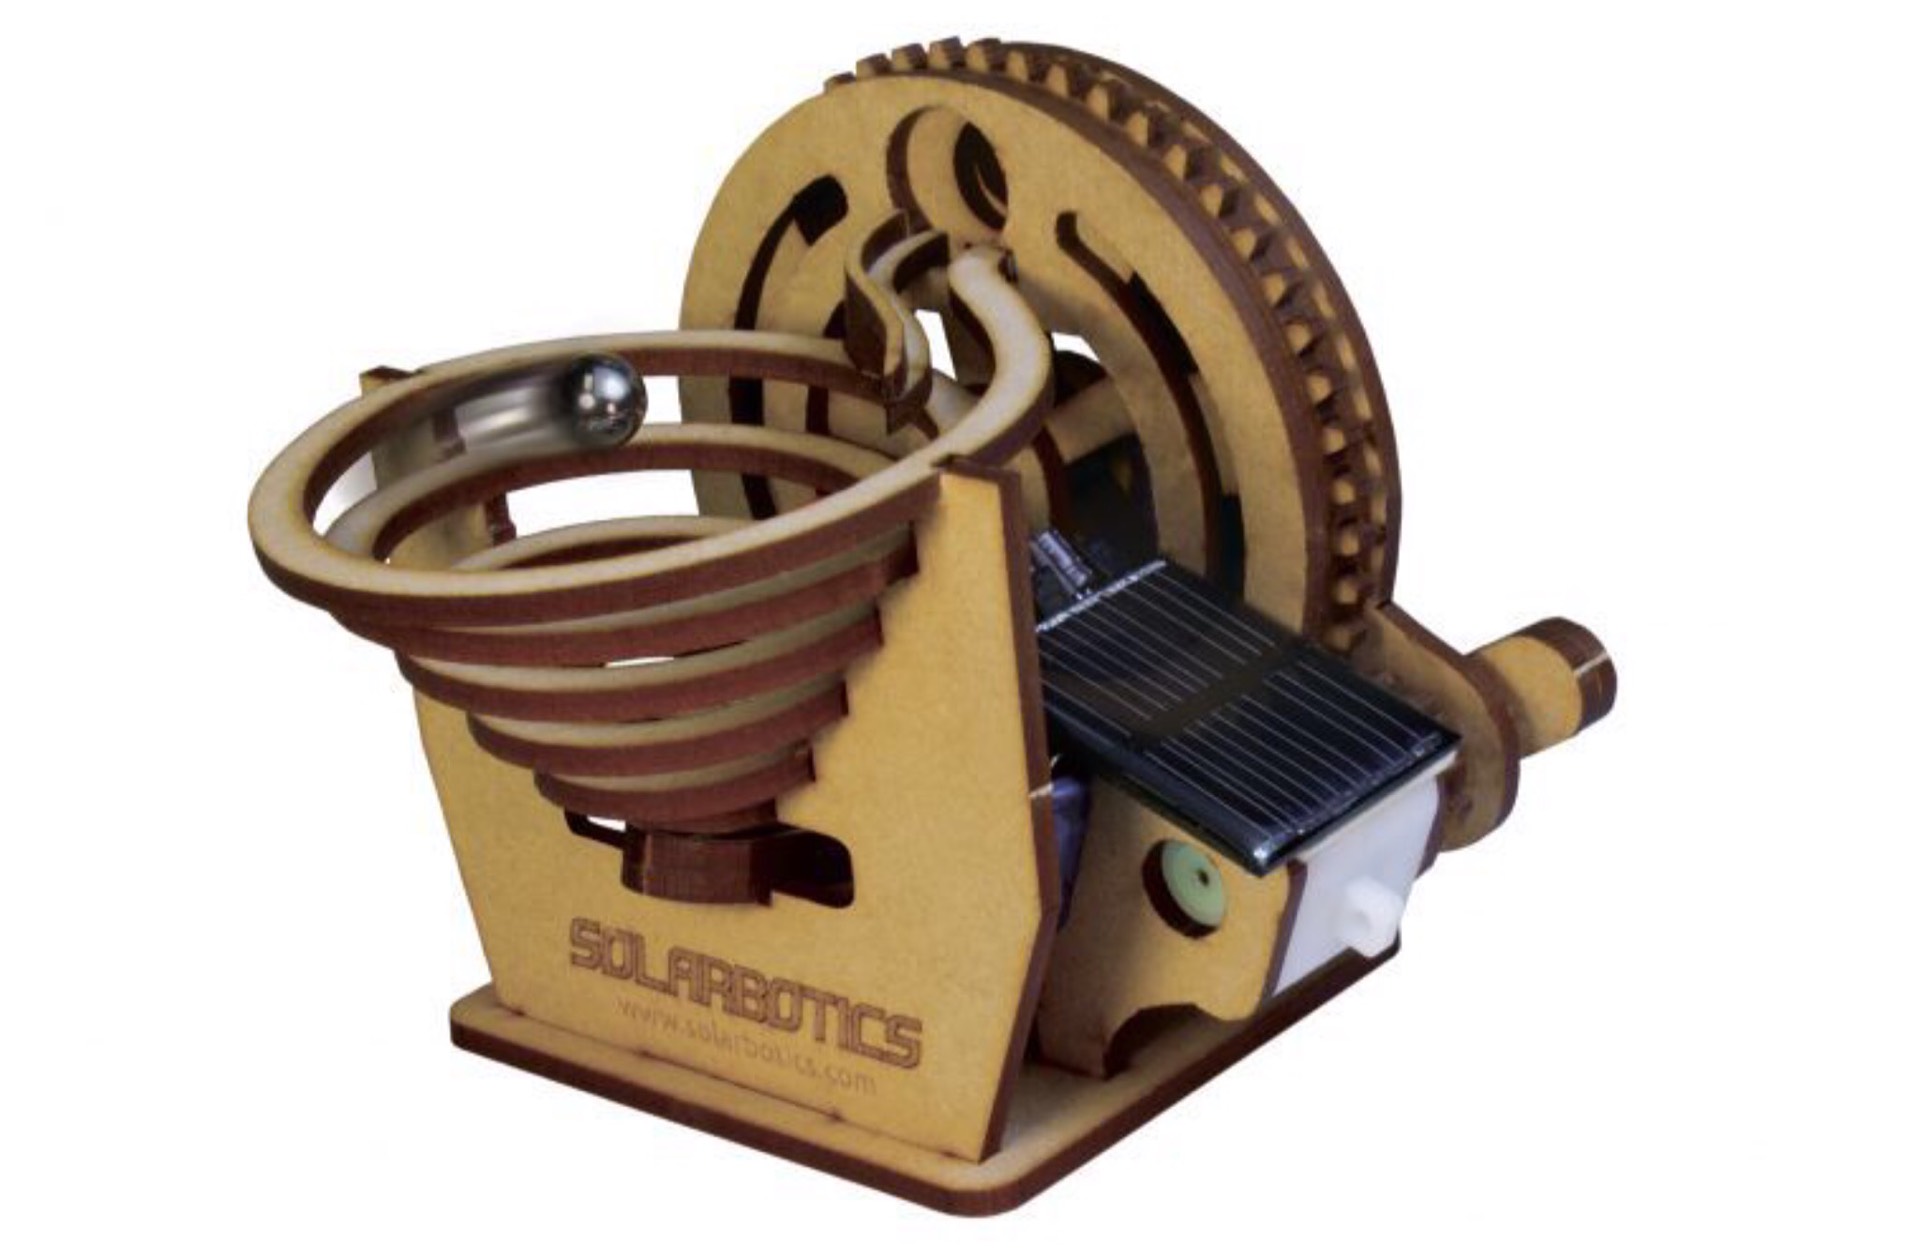 The Solar Marble Machine by Solarbotics. ($43)